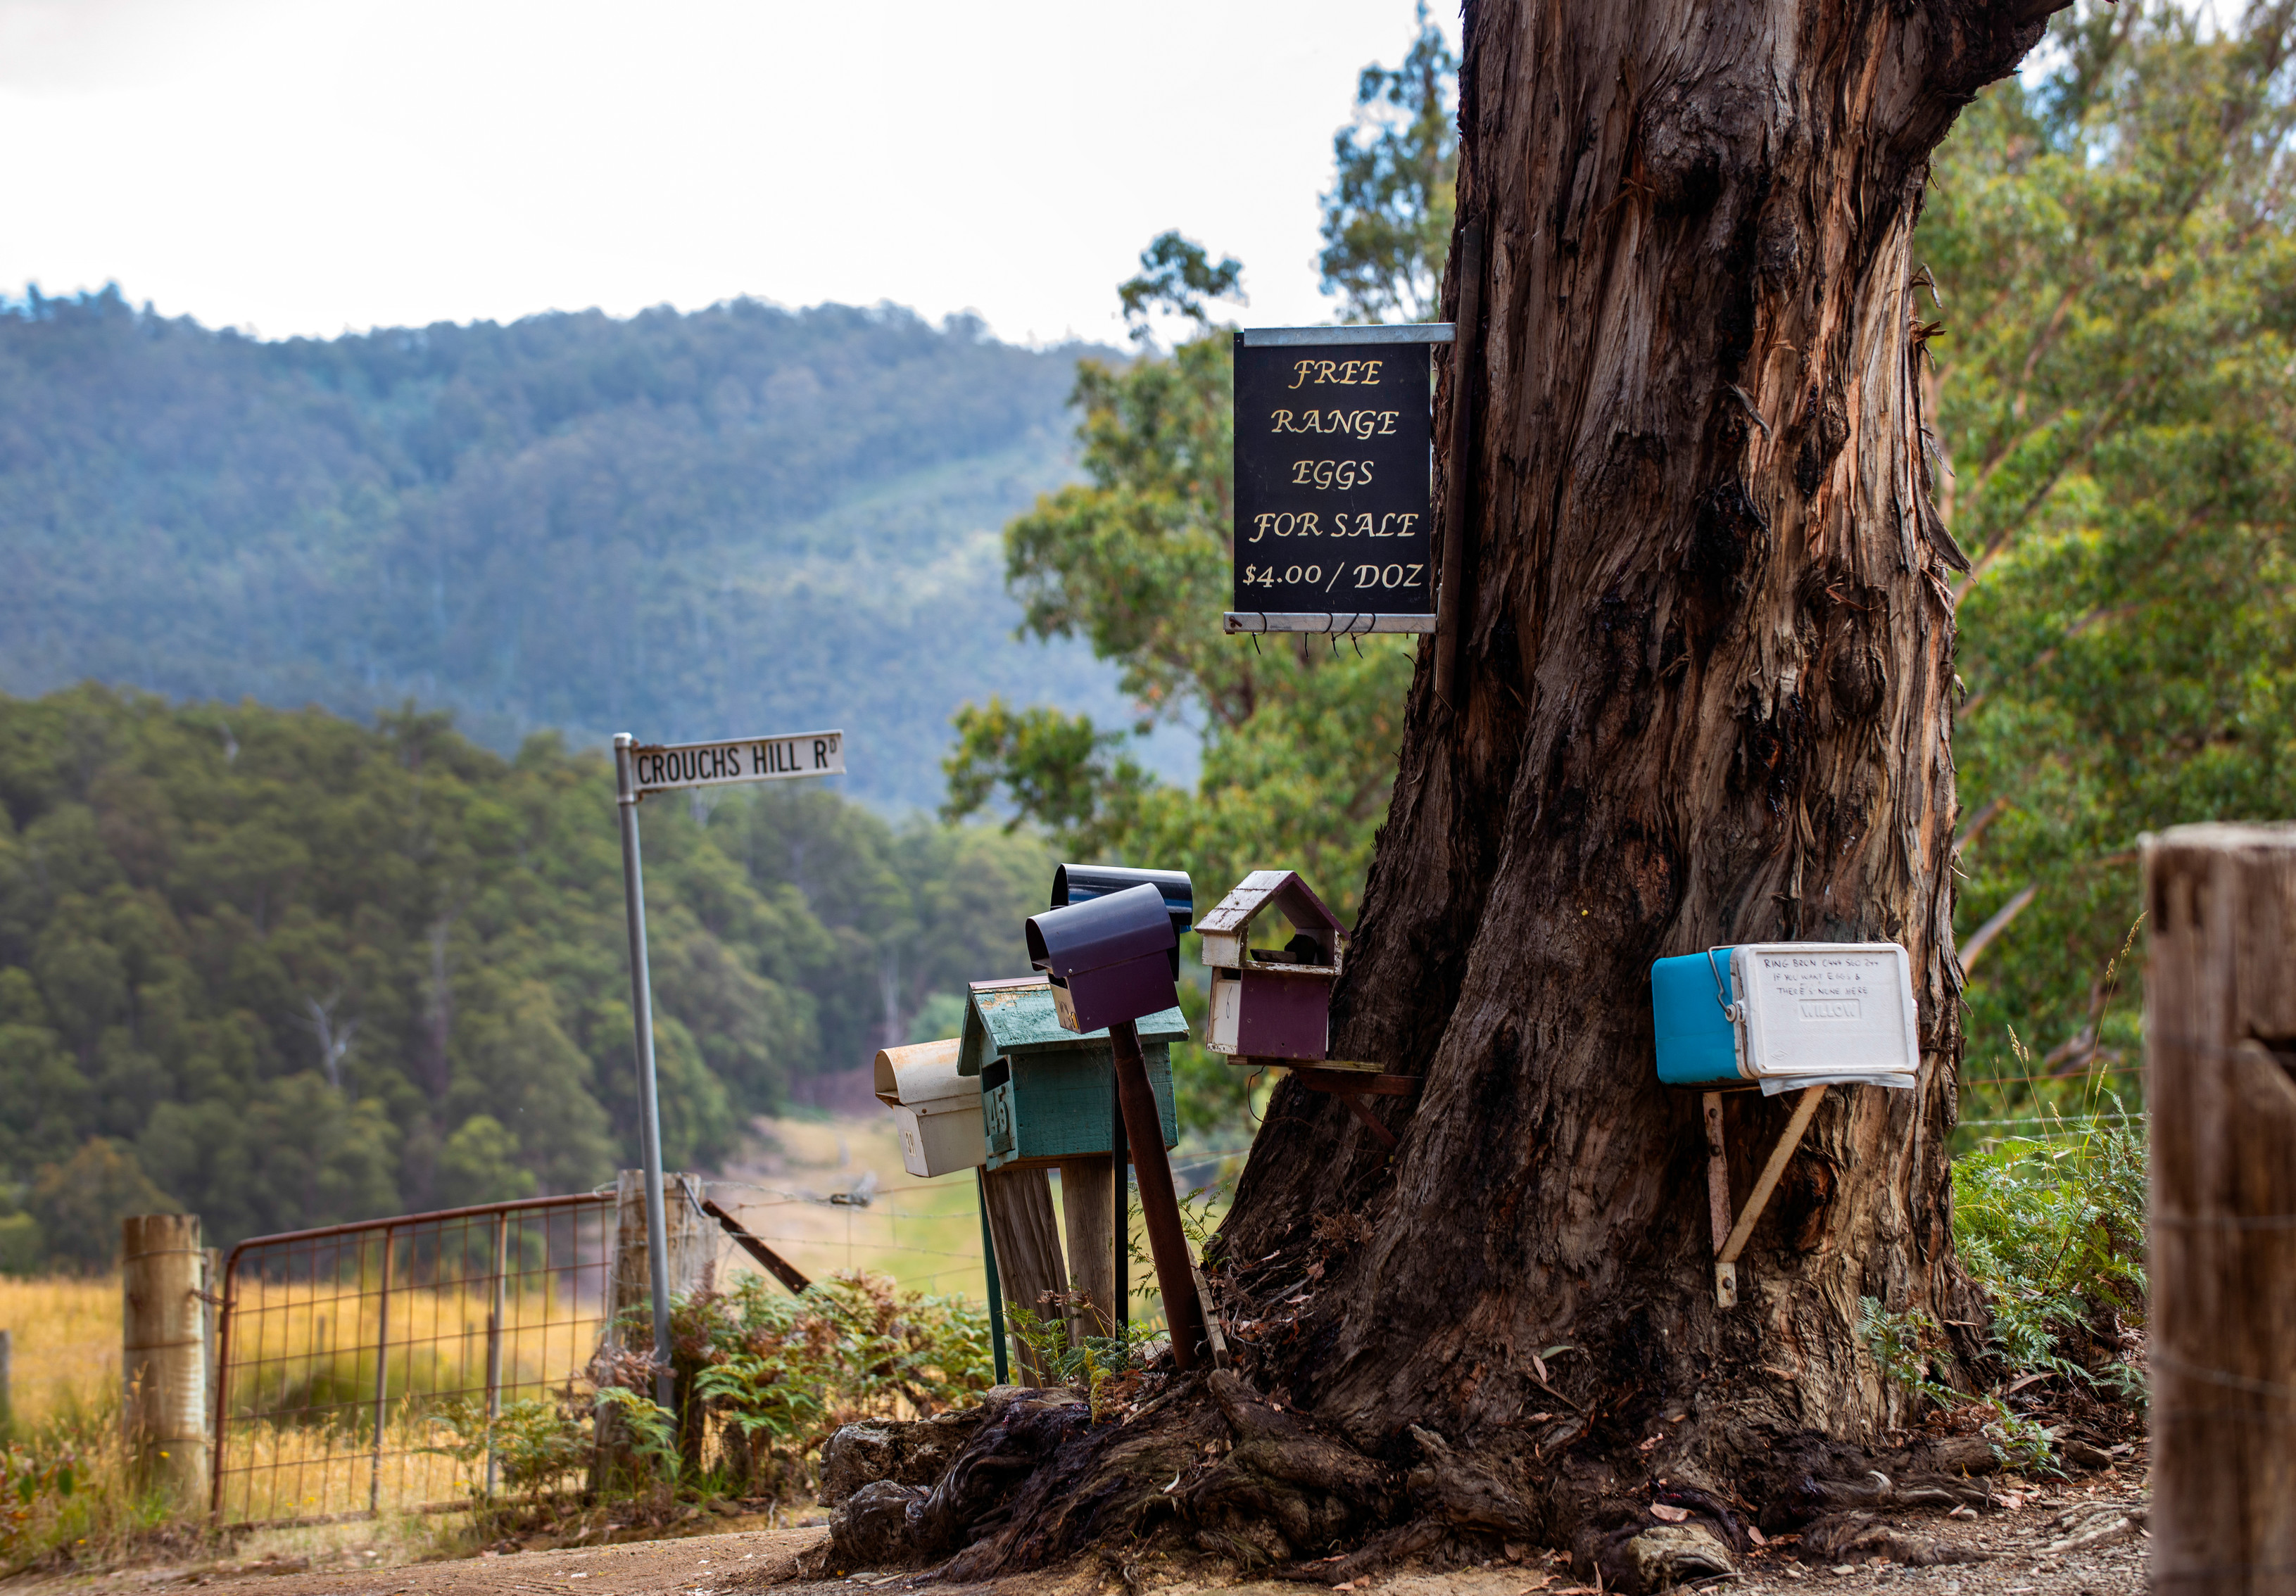 Letterboxes by a large tree at the Roadside stall, Lucaston.